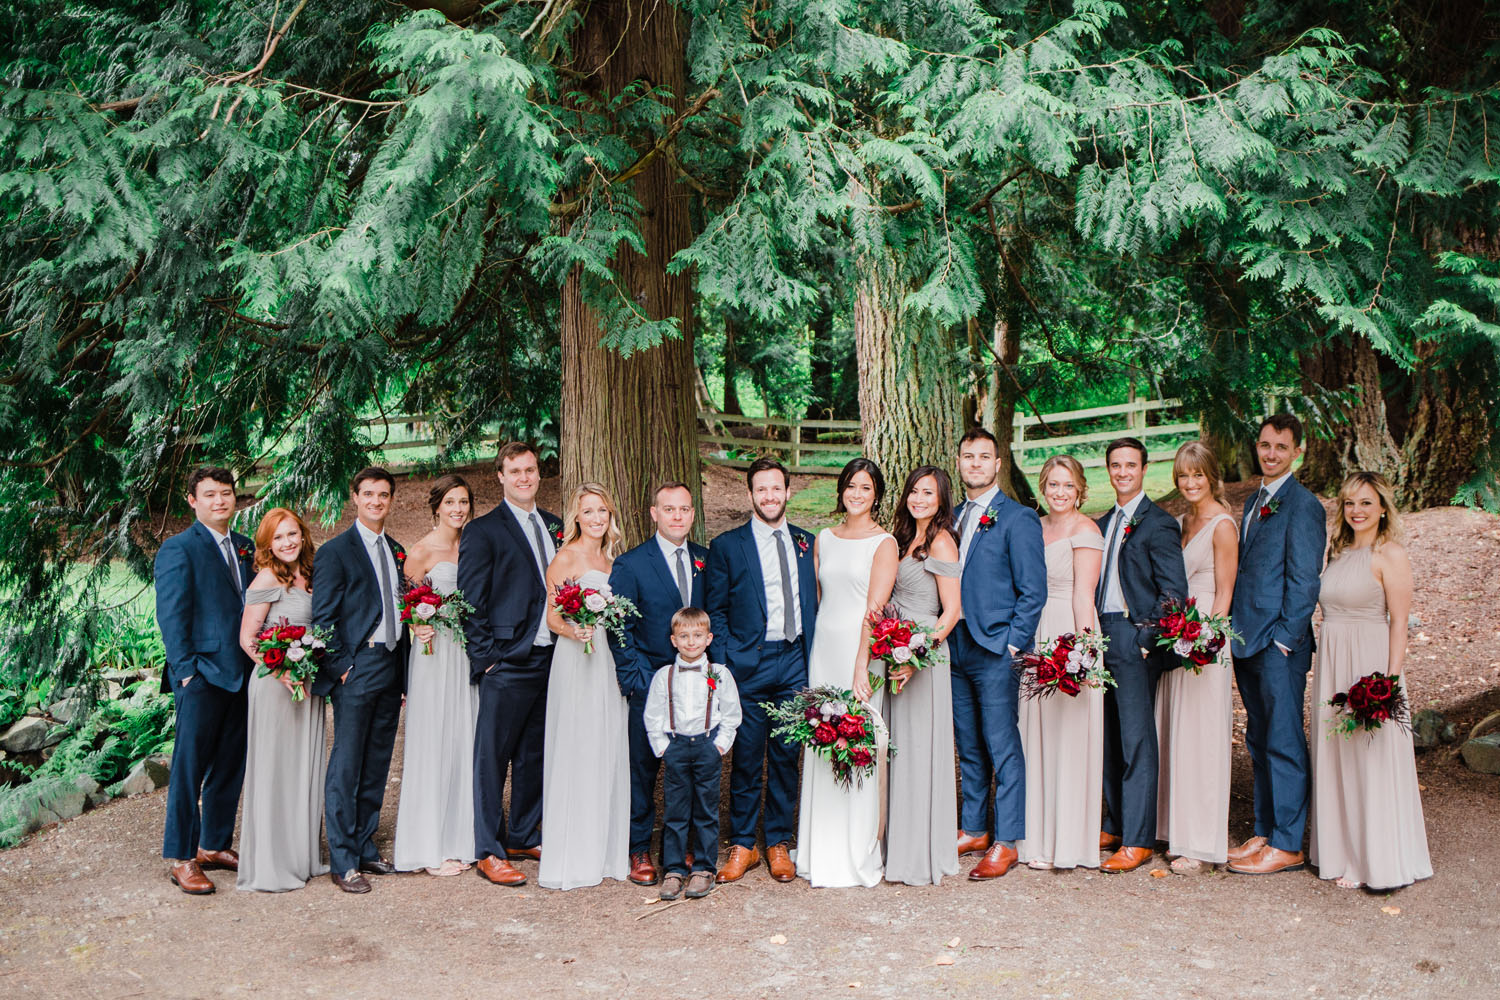 delille cellars seattle wedding winery blush and navy bridal party wedding photography.jpg